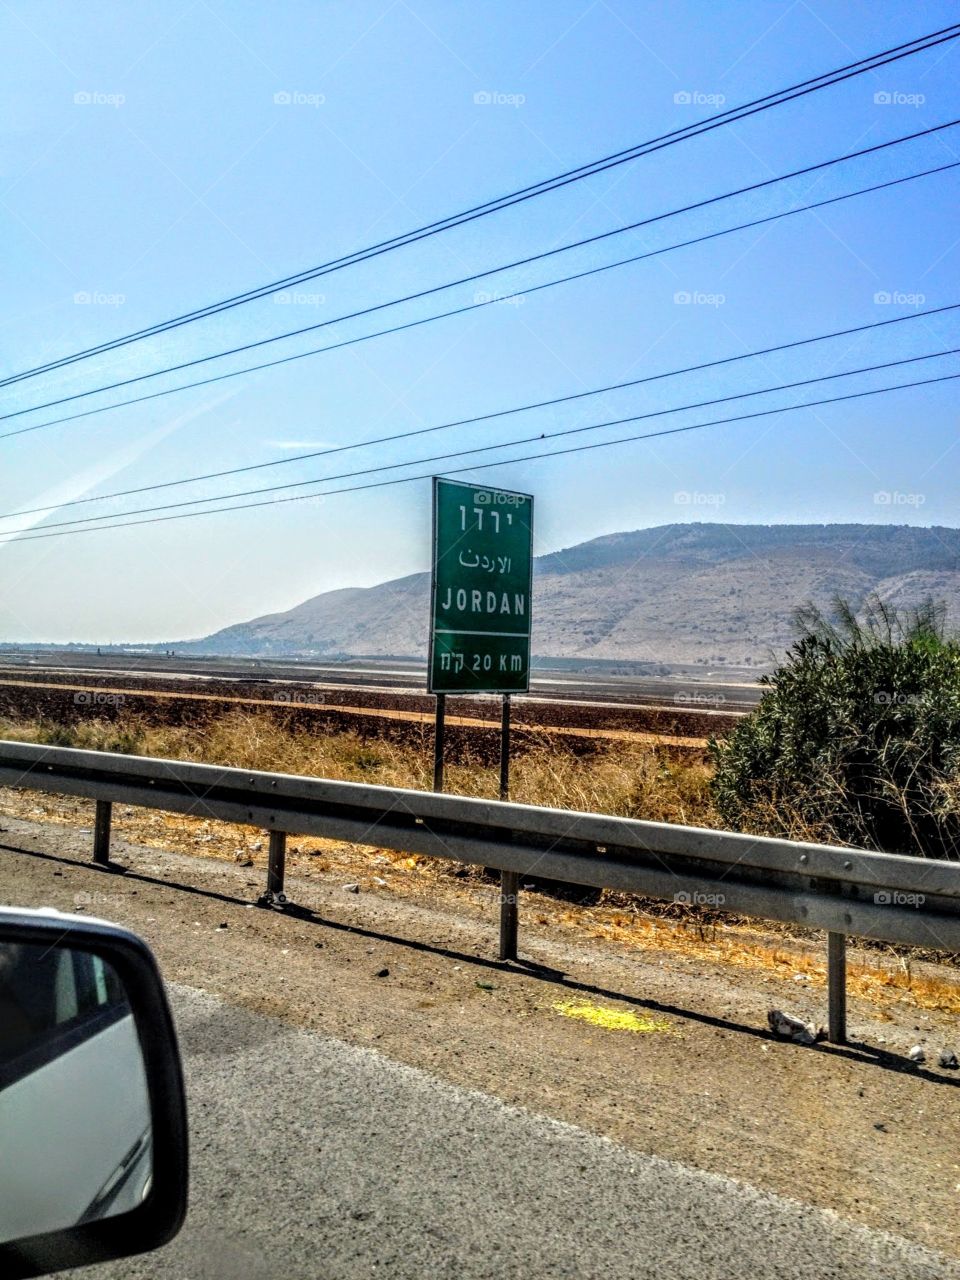 sign in Israel to get to Jordan in kilometers with mountain background